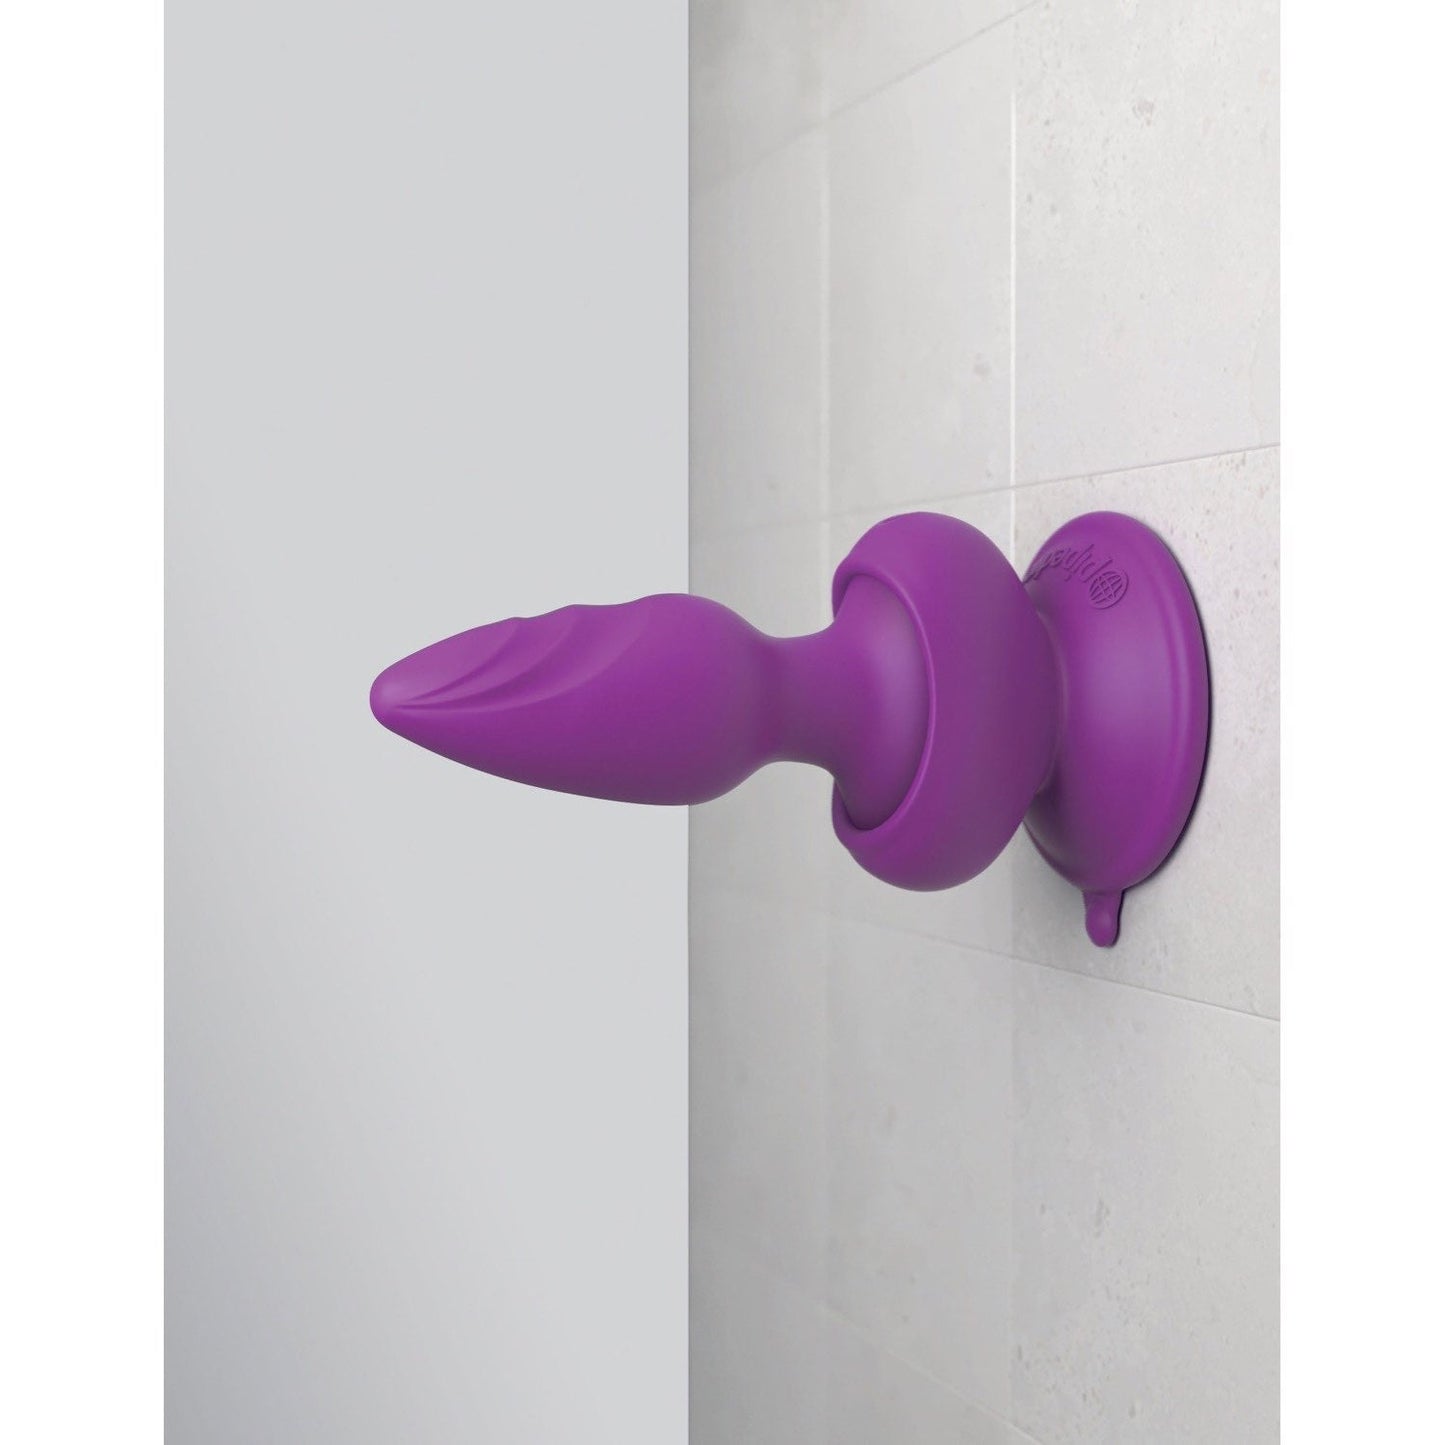 Wall Banger Plug - Purple USB Rechargeable Vibrating Butt Plug with Wireless Remote